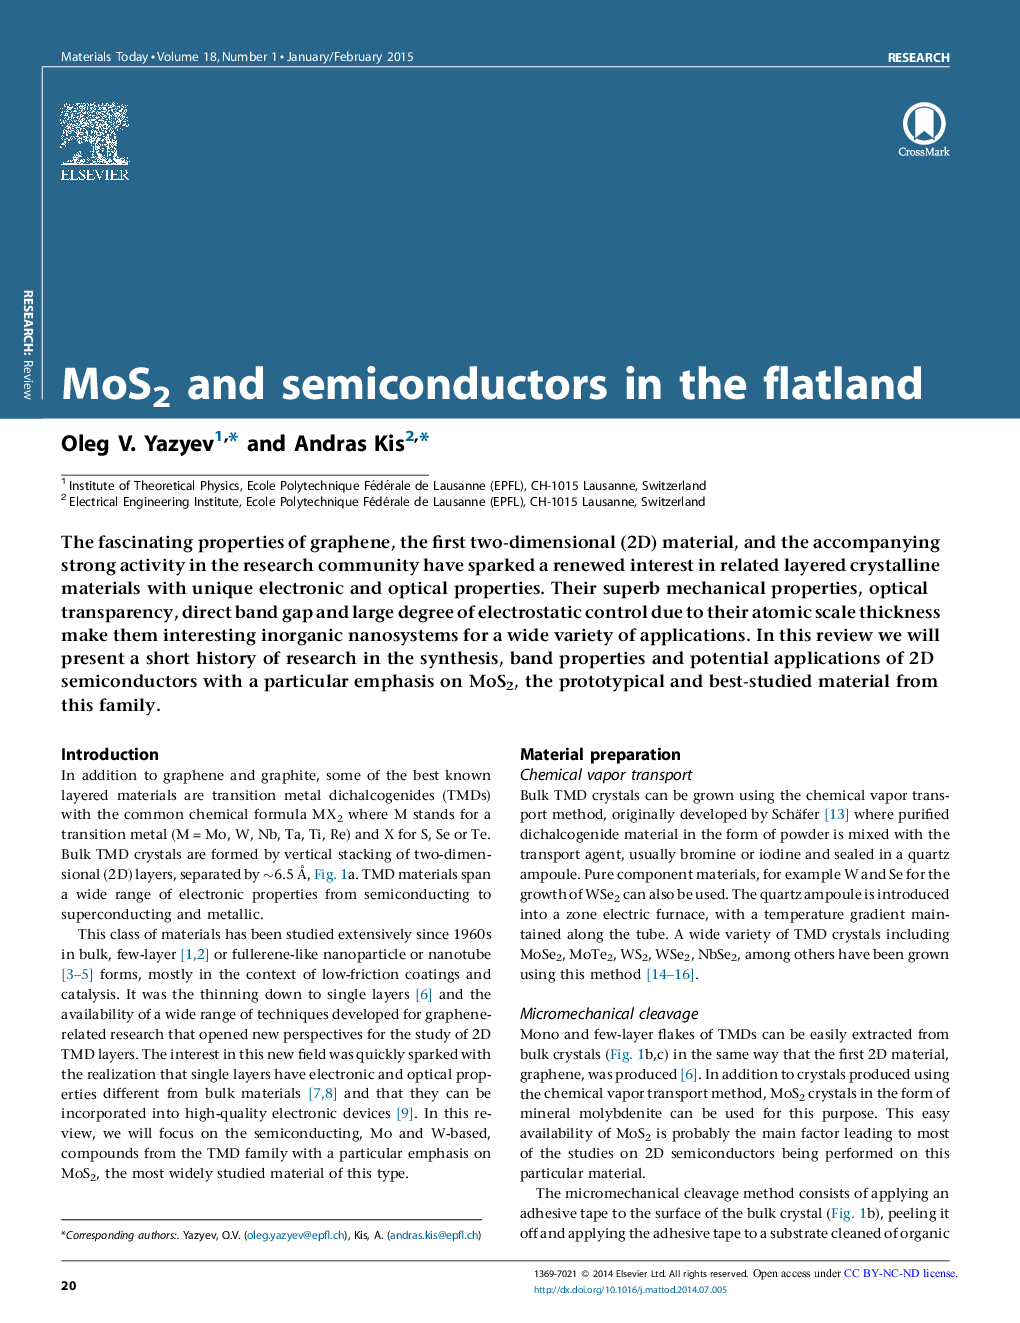 MoS2 and semiconductors in the flatland